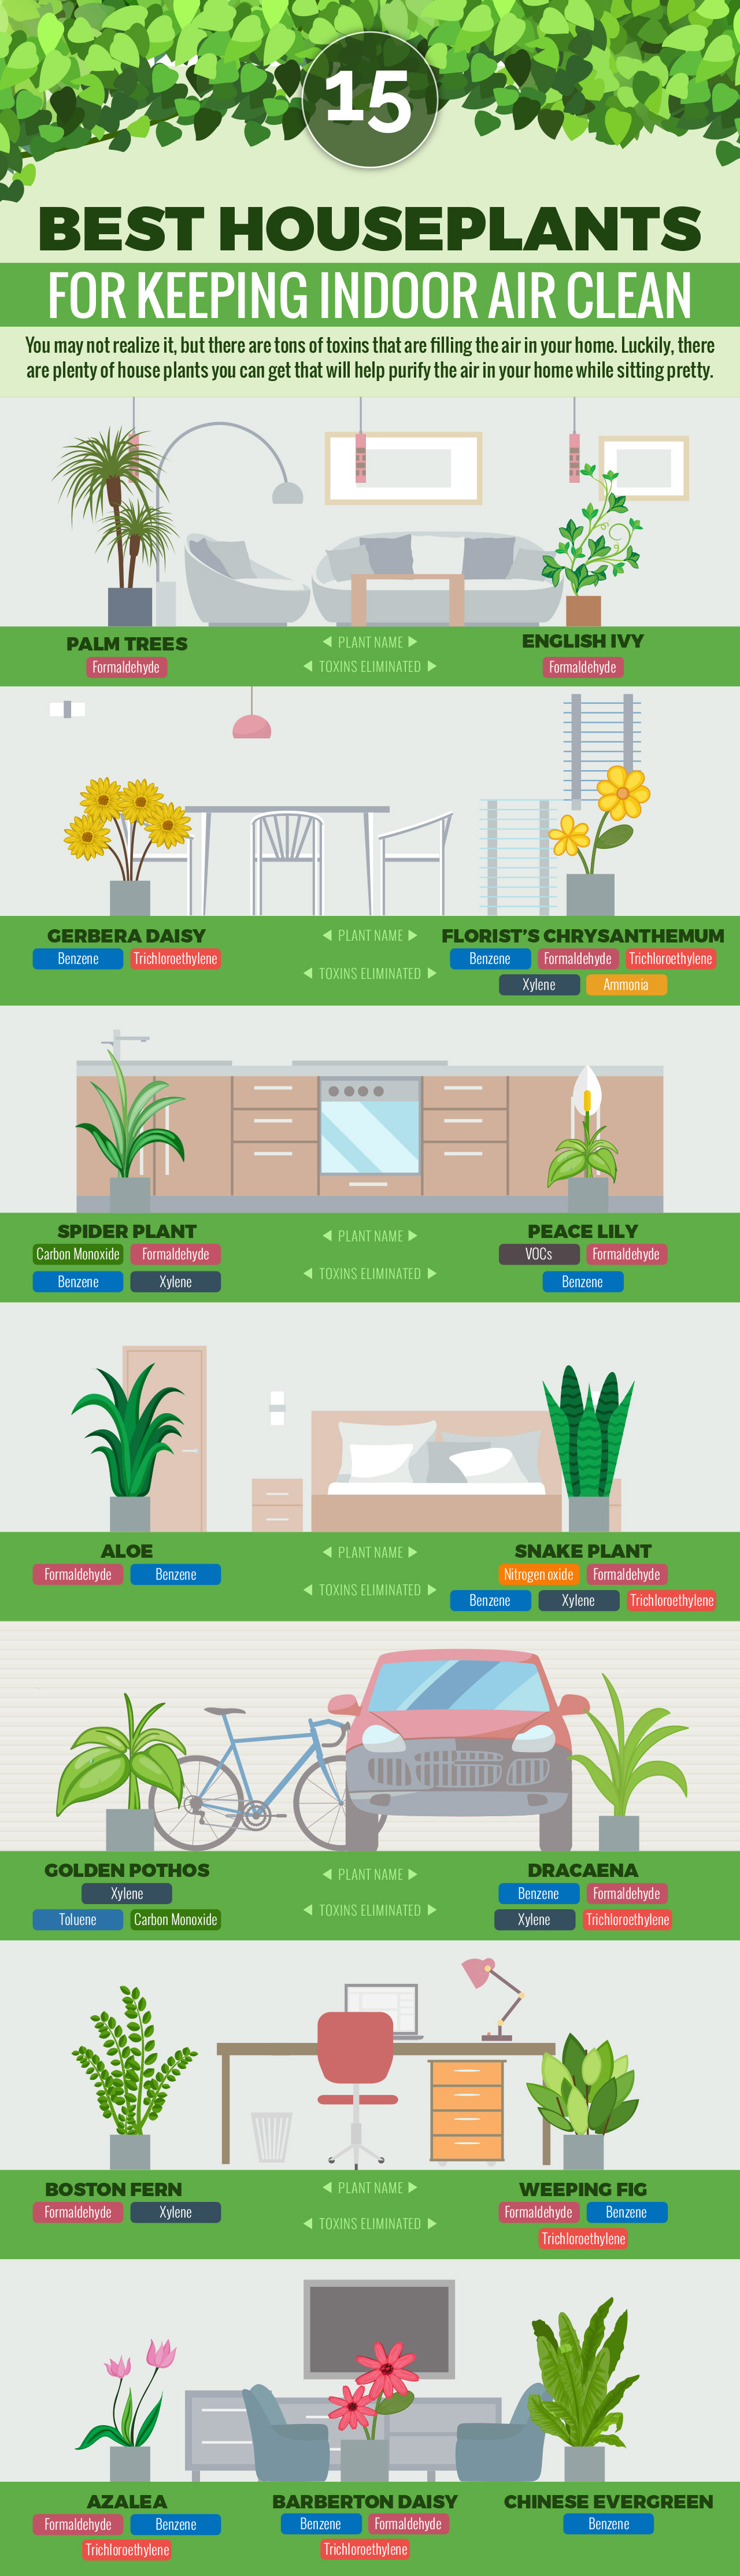 infographic-15-best-houseplants-for-keeping-indoor-air-clean-article